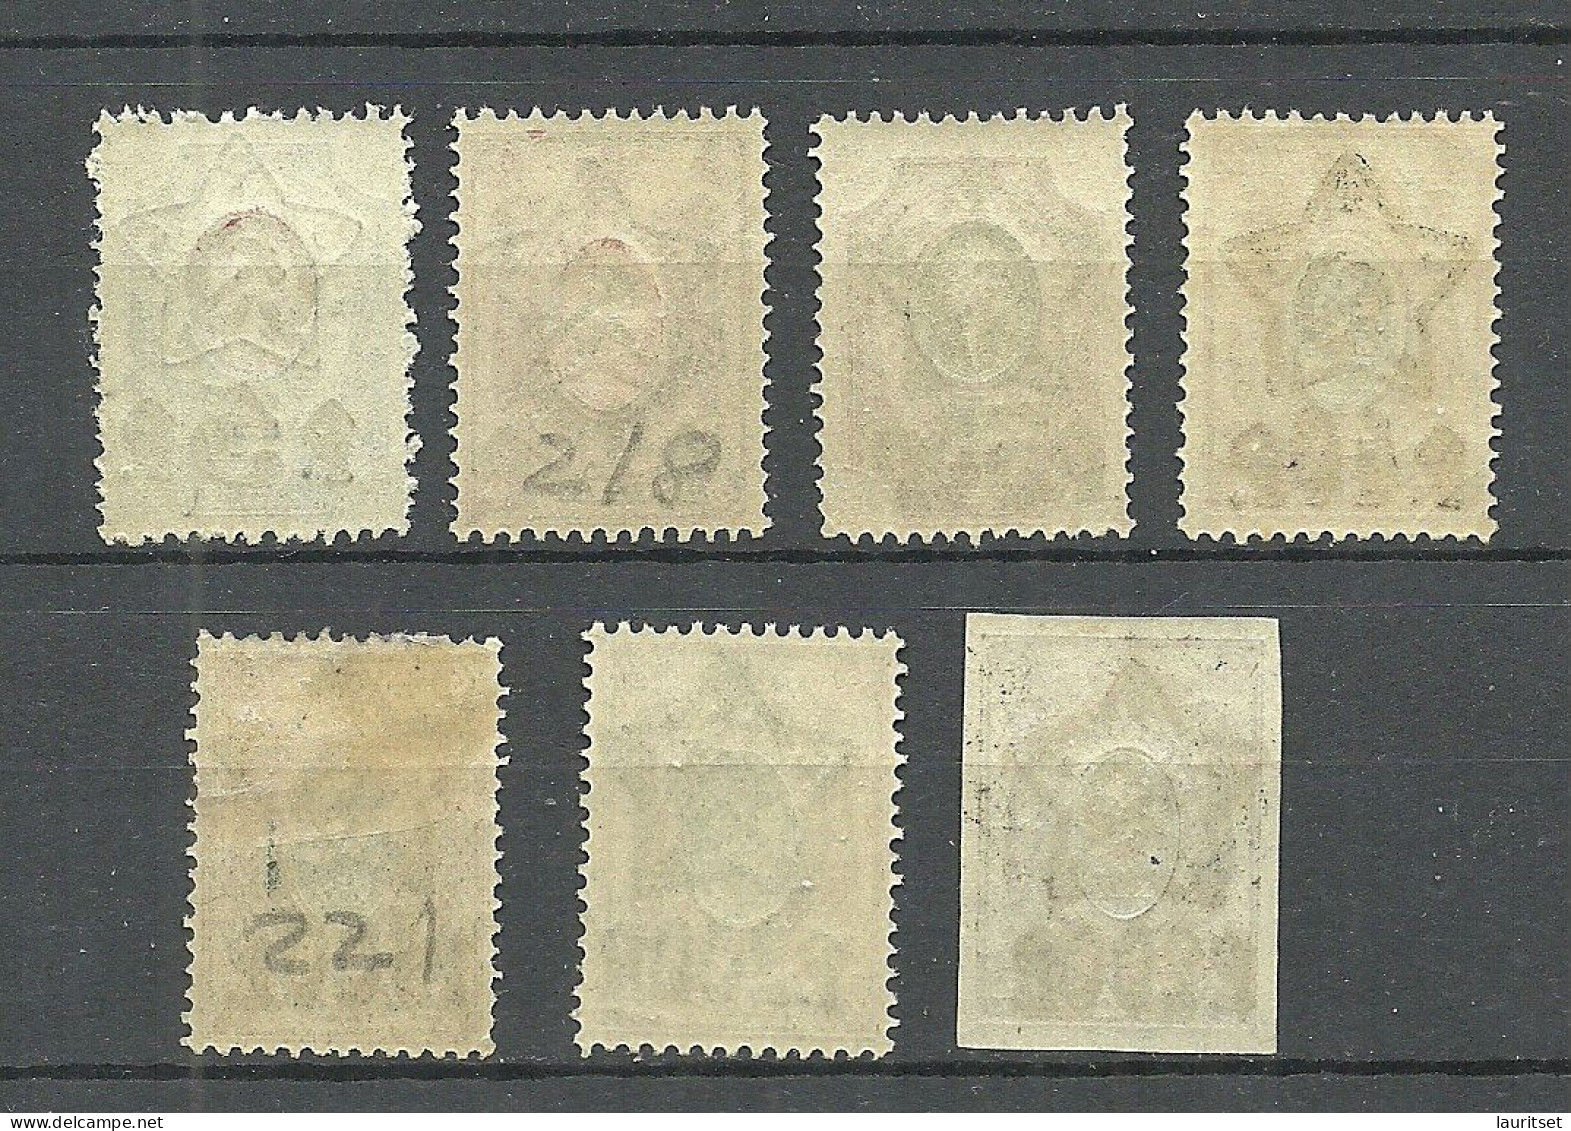 RUSSLAND RUSSIA 1922/1923 = Lot Of 7 Stamps From Set Michel 201 - 207 MNH/MH (100 P. OPT Is MH/*, All Others Are MNH) - Unused Stamps